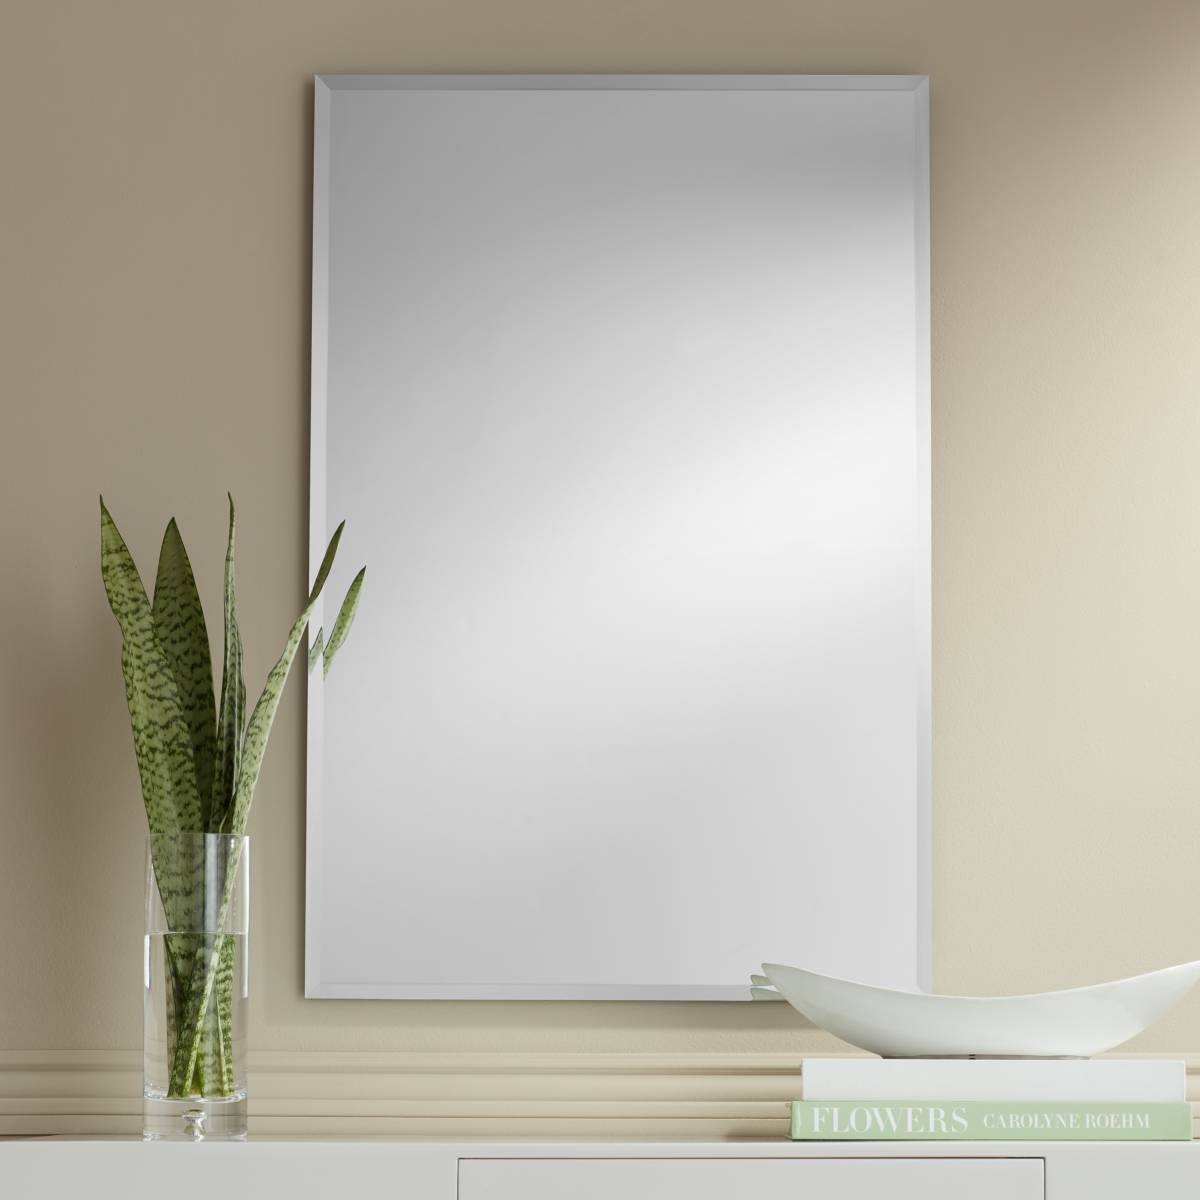 Large Frameless Vanity Mirror With Lights and Mirror Desk 32 X 27 